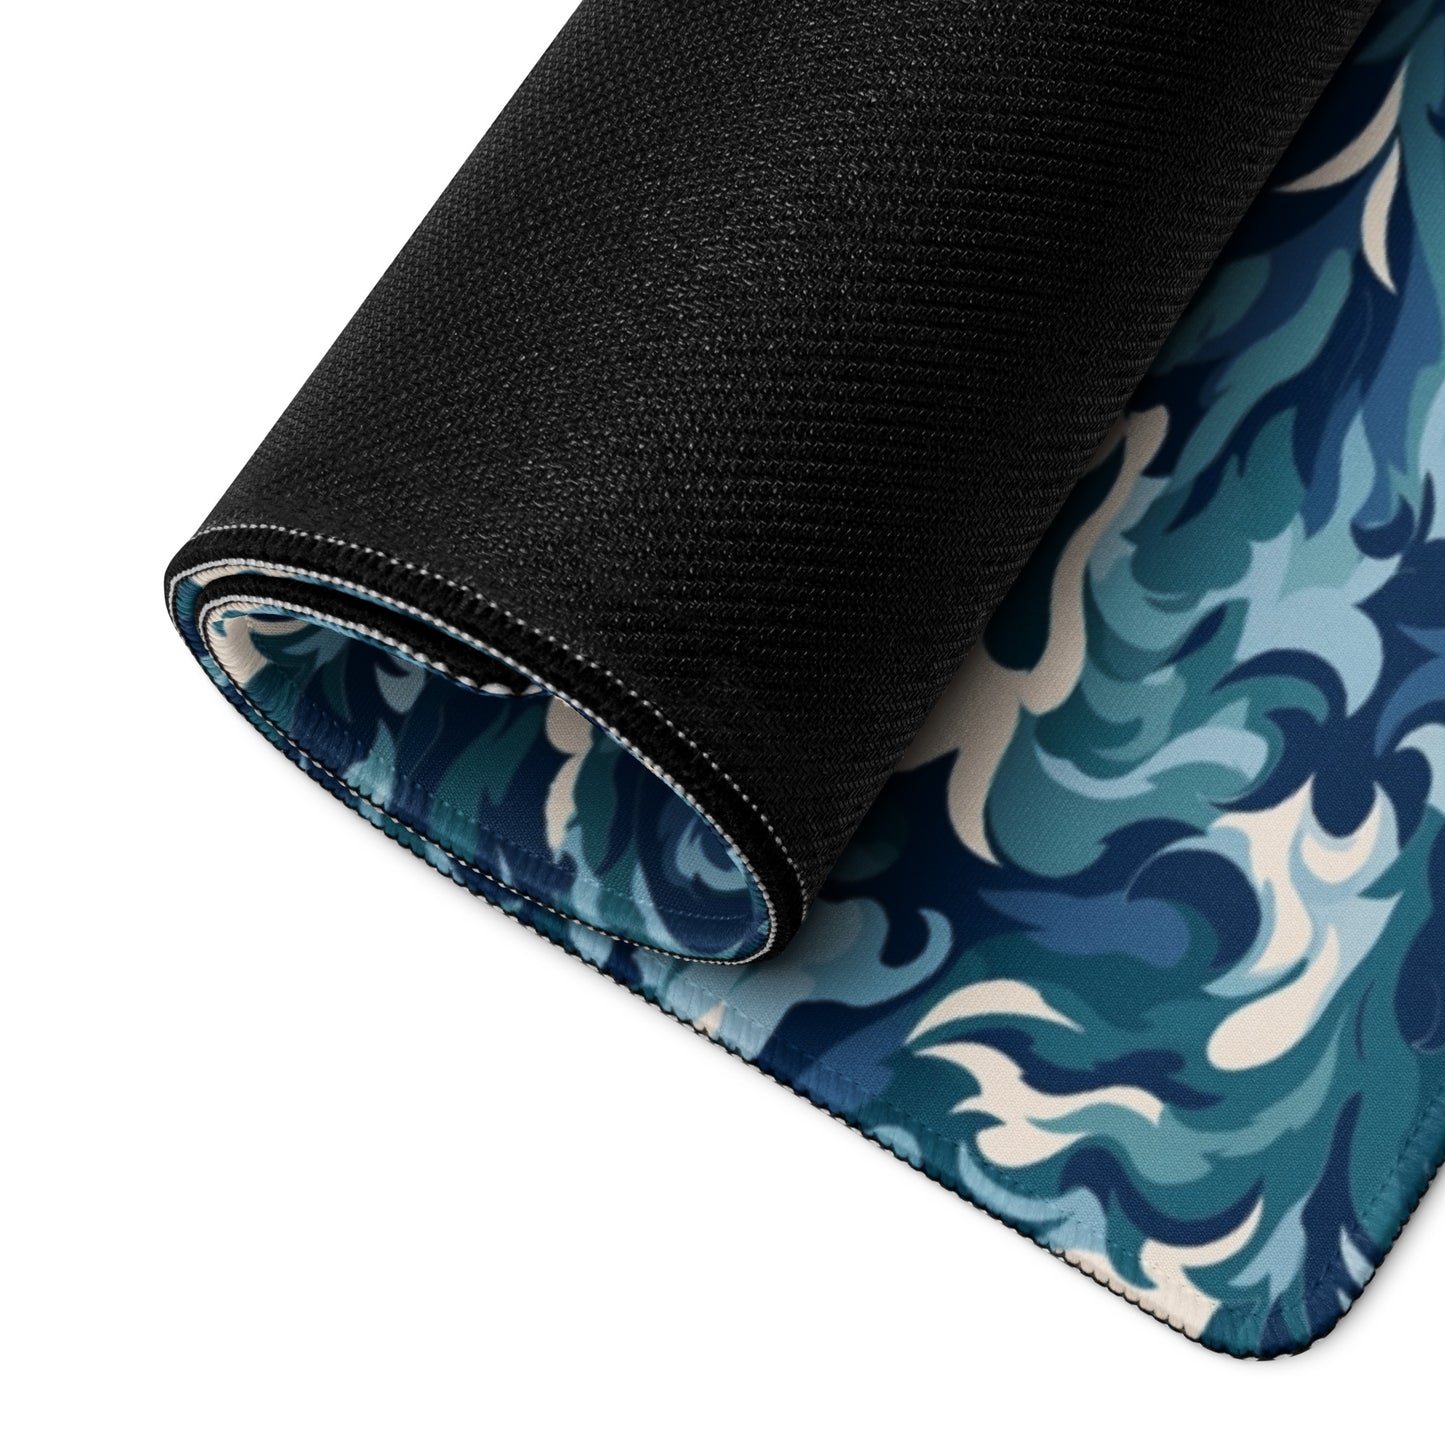 A 36" x 18" desk pad with a teal and white camo pattern rolled up.